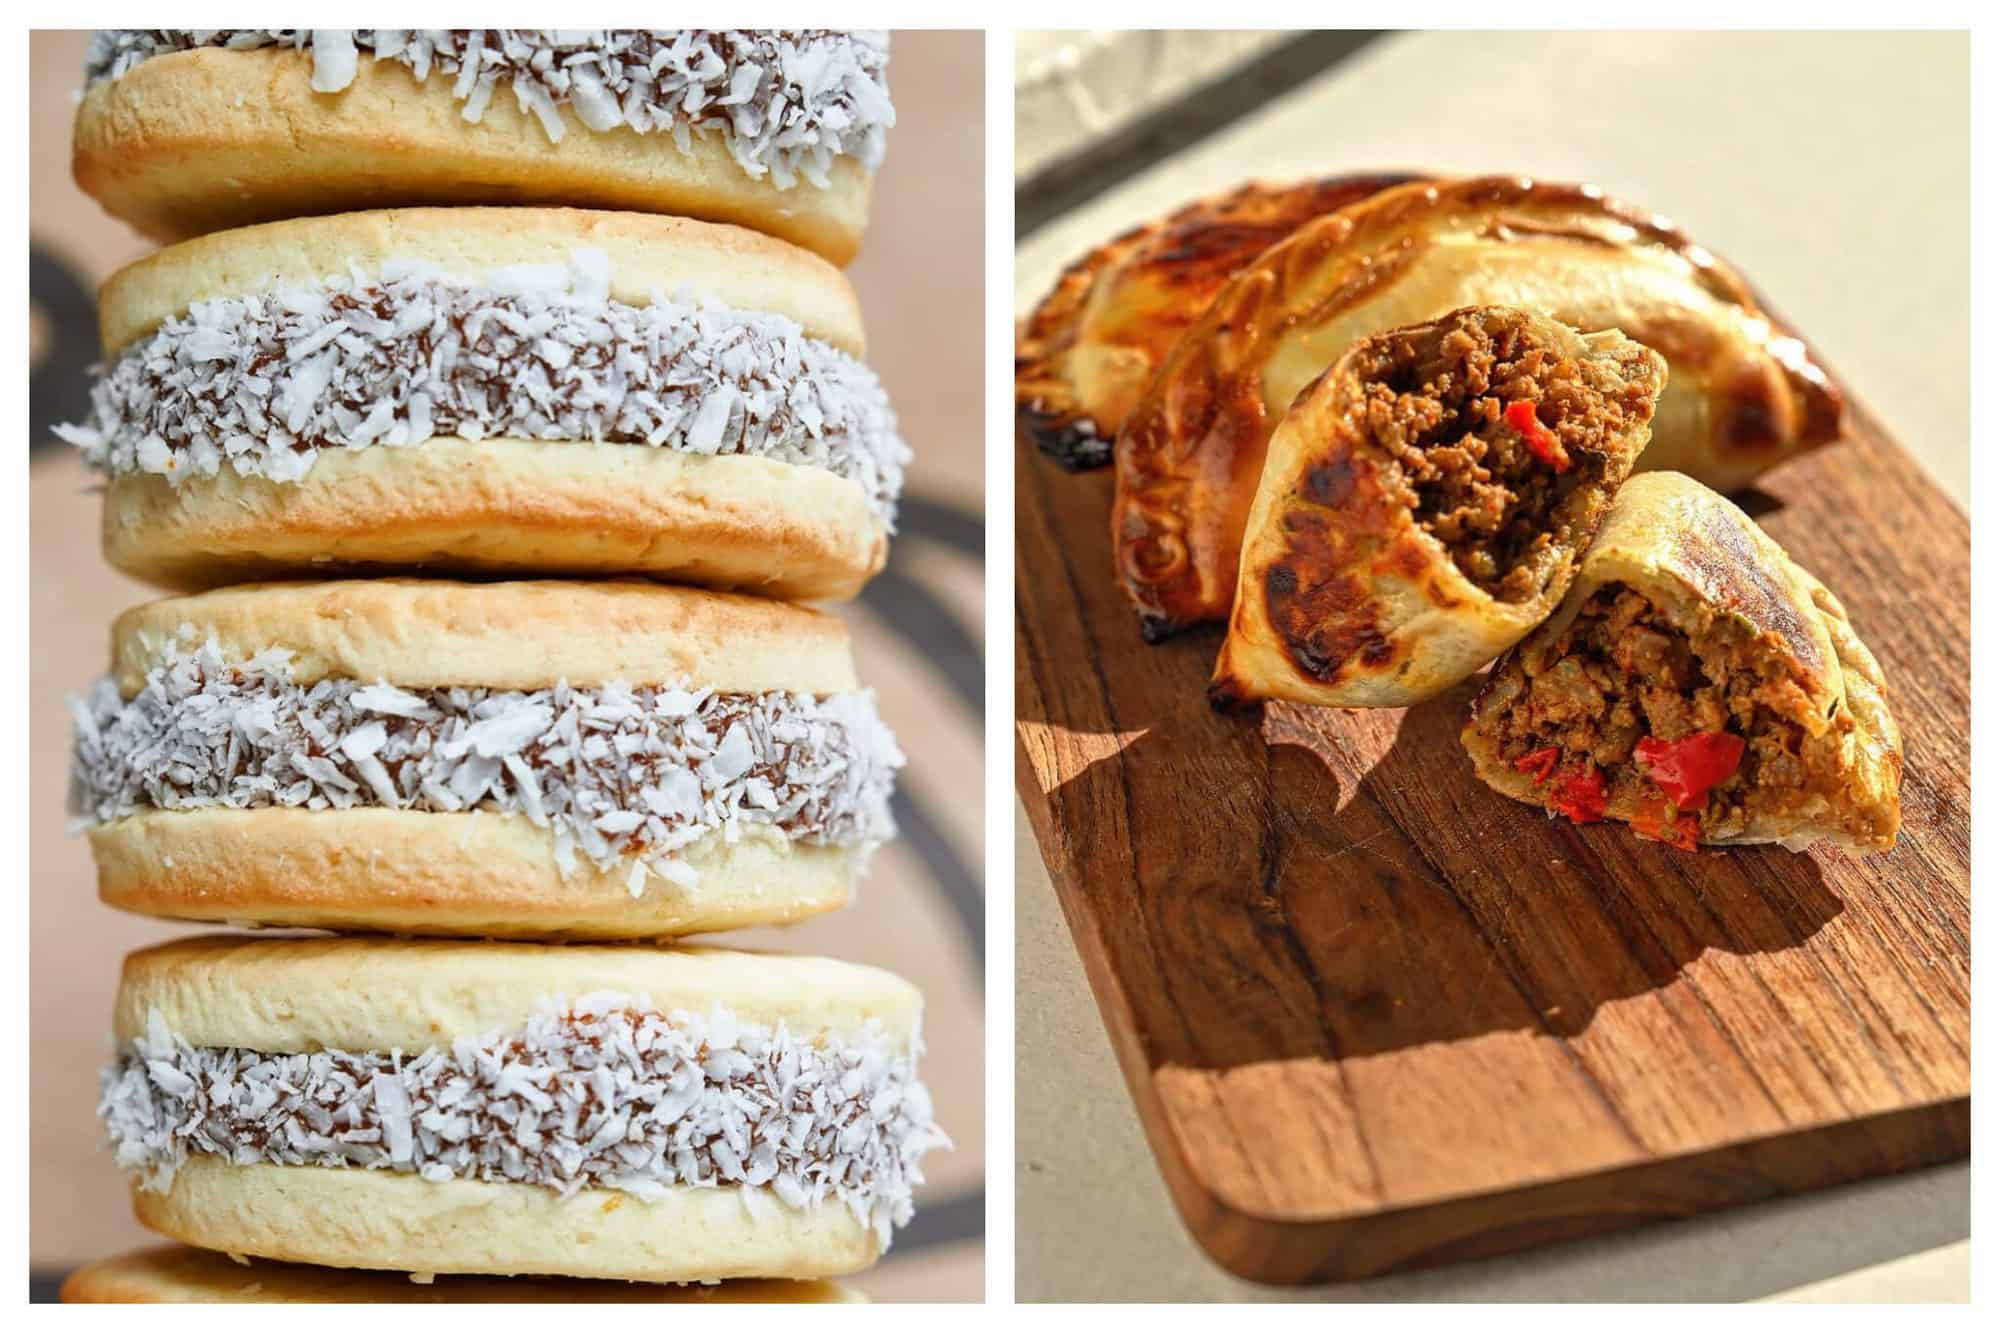 Left: White cookies filled with a brown filling called dulce de leche covered in white coconut flakes. Right: Bronzed empanadas on a wooden plank filled with ground beer and red peppers. 